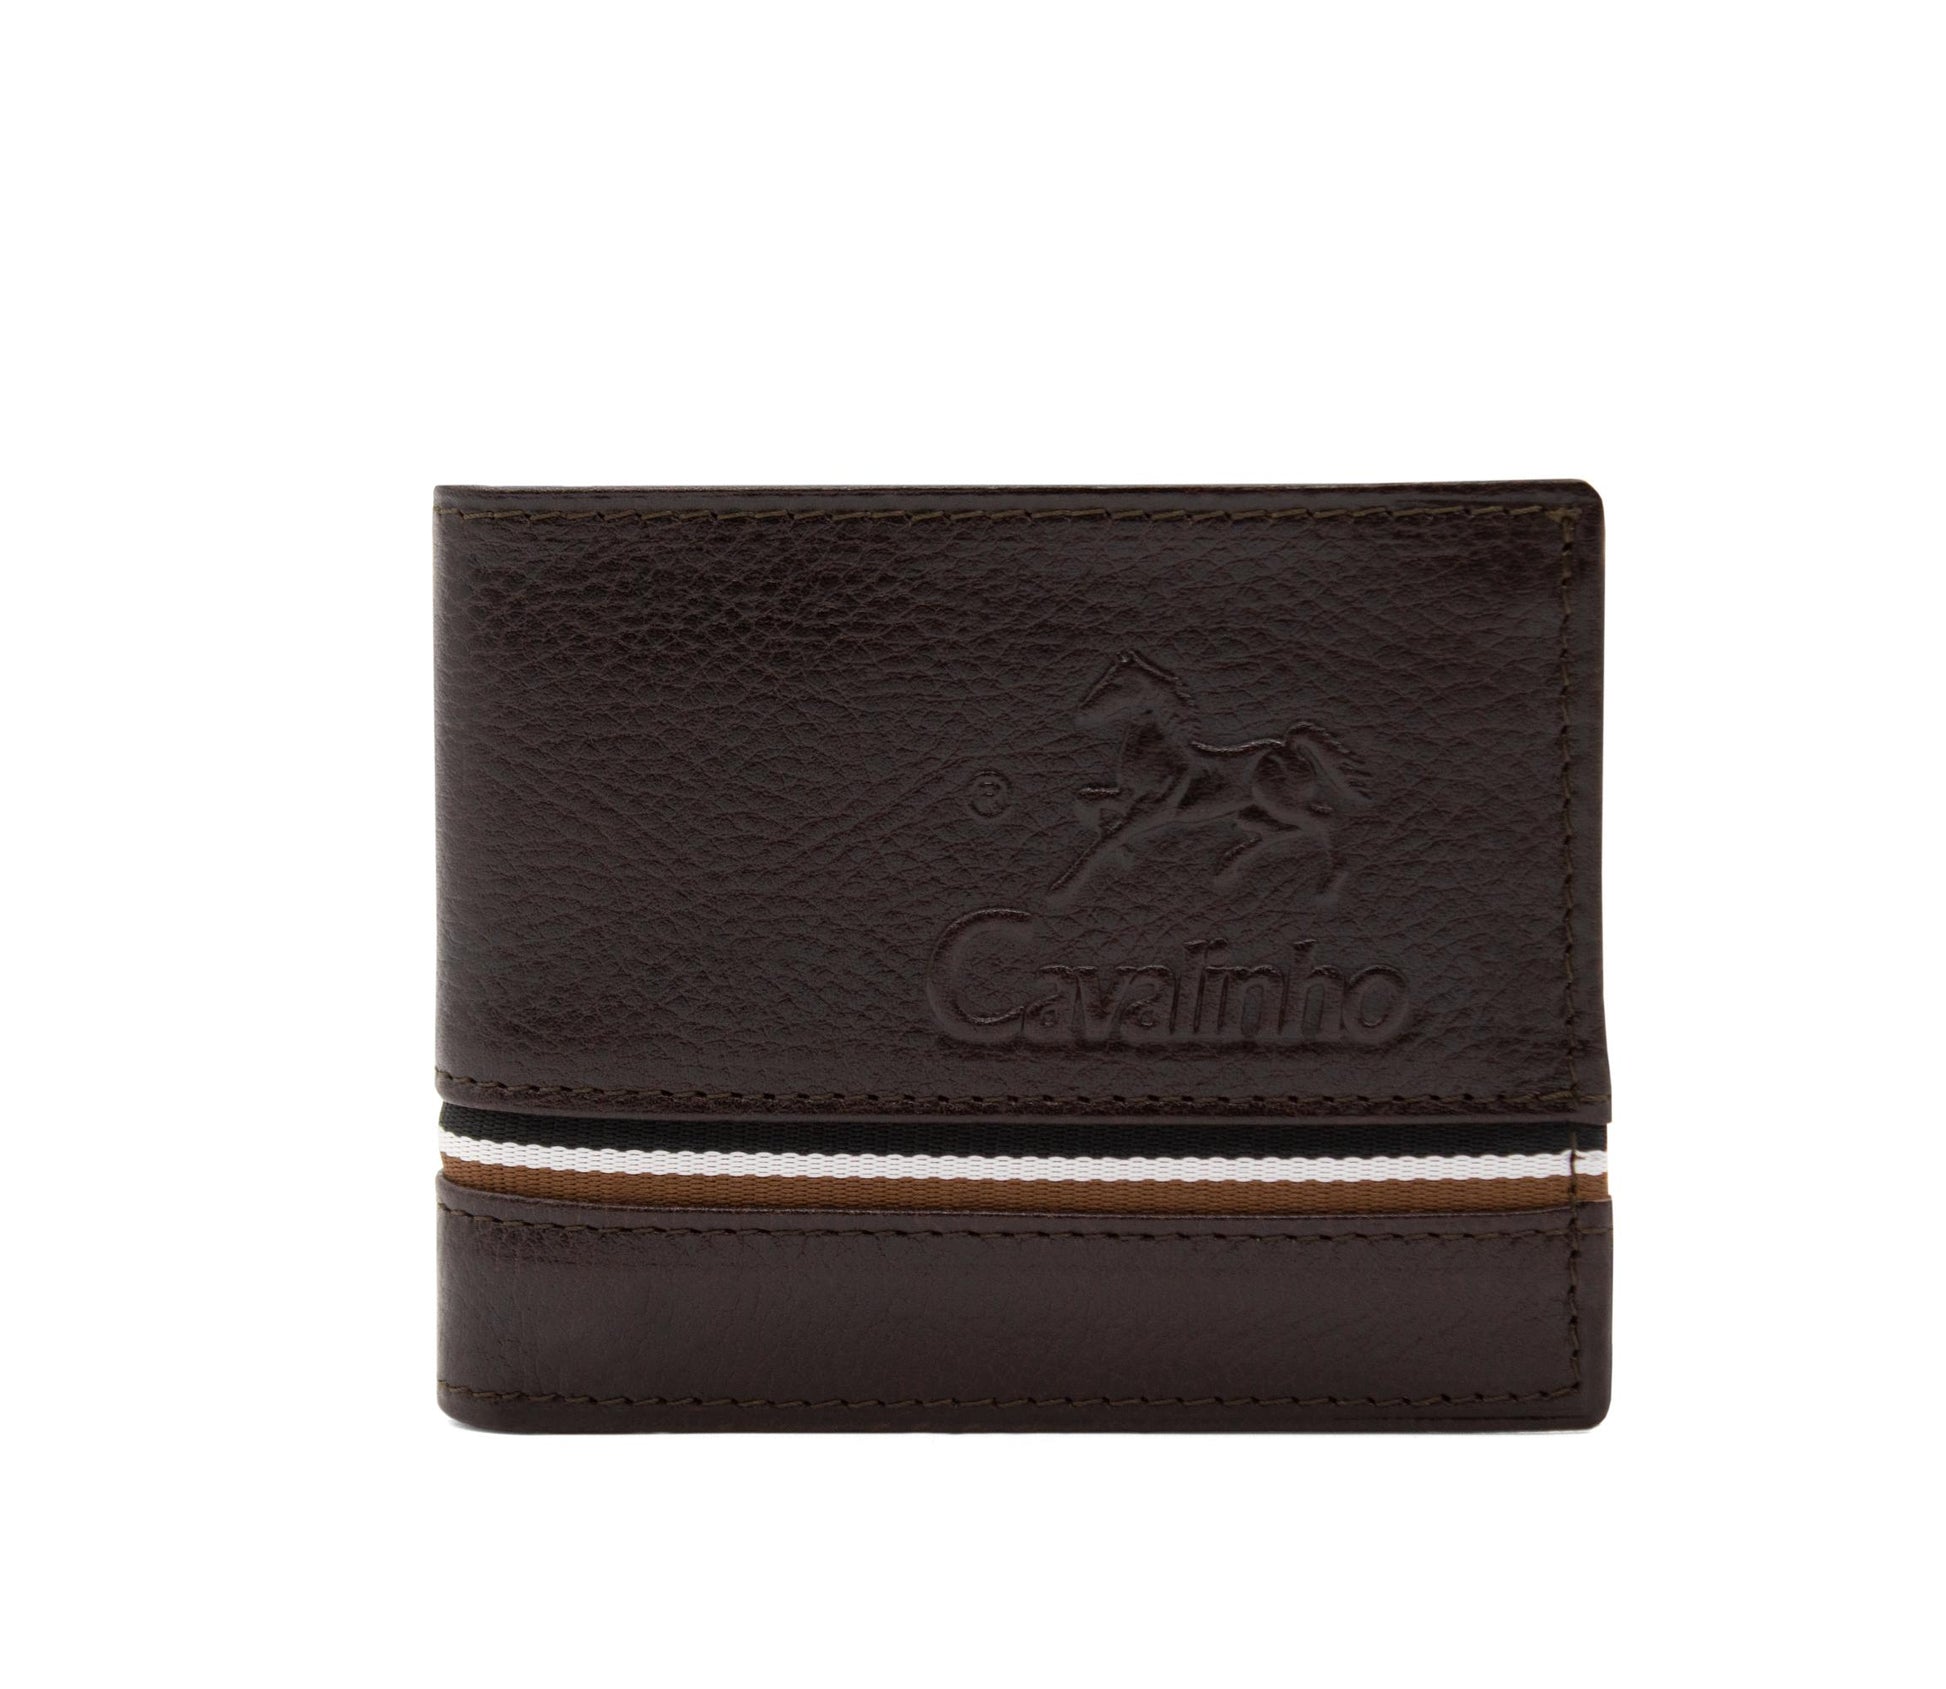 Cavalinho The Sailor Trifold Leather Wallet - Brown - 28150517.02_1